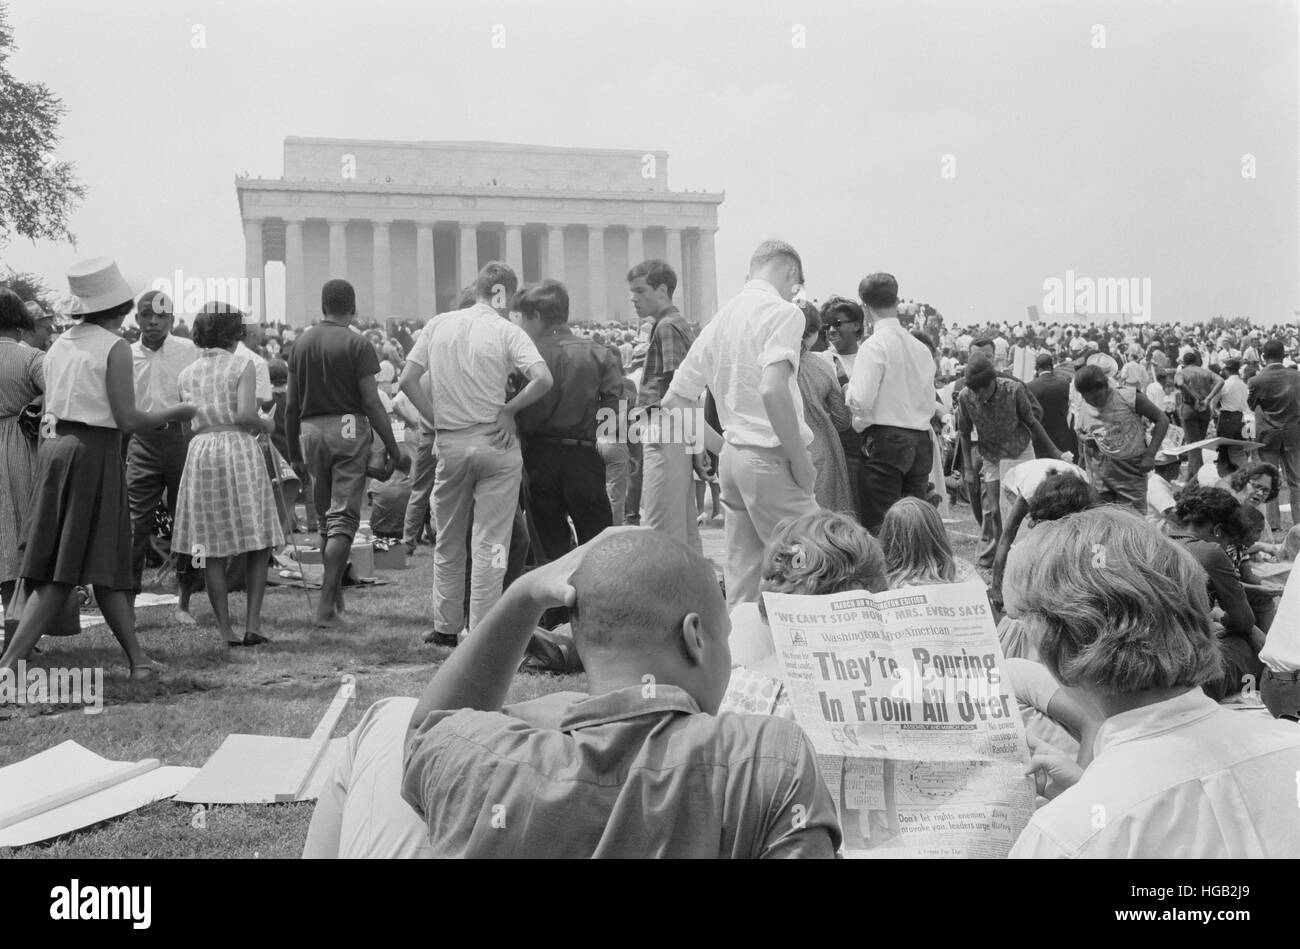 Crowd of African Americans and whites on the grounds of the Lincoln Memorial in Washington D.C., 1963. Stock Photo